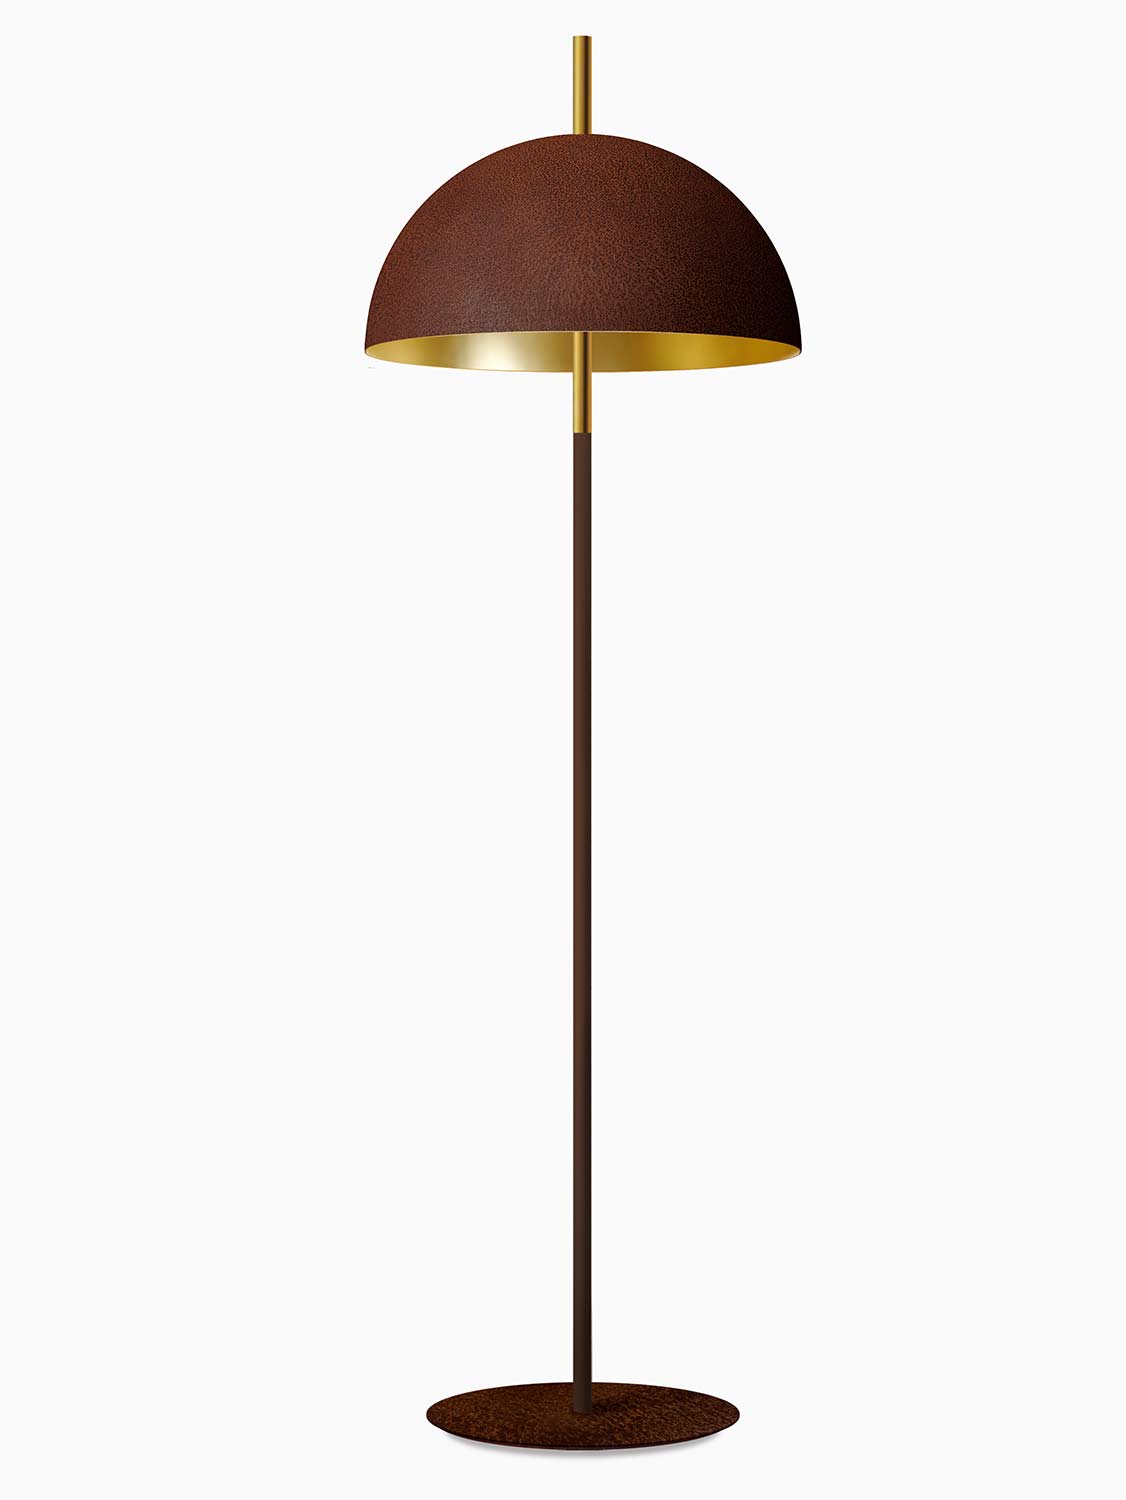 Luxury 23,75 kt Gold Free-standing lamp | Contemporary Handmade Corroded Steel Dome Lighting | Lobby Restaurant Living room Decor | Design lighting | Natural Interior | Exclusive Golden platted  lamp | Cozy  Light | mammalampa The Queen Floor lamp